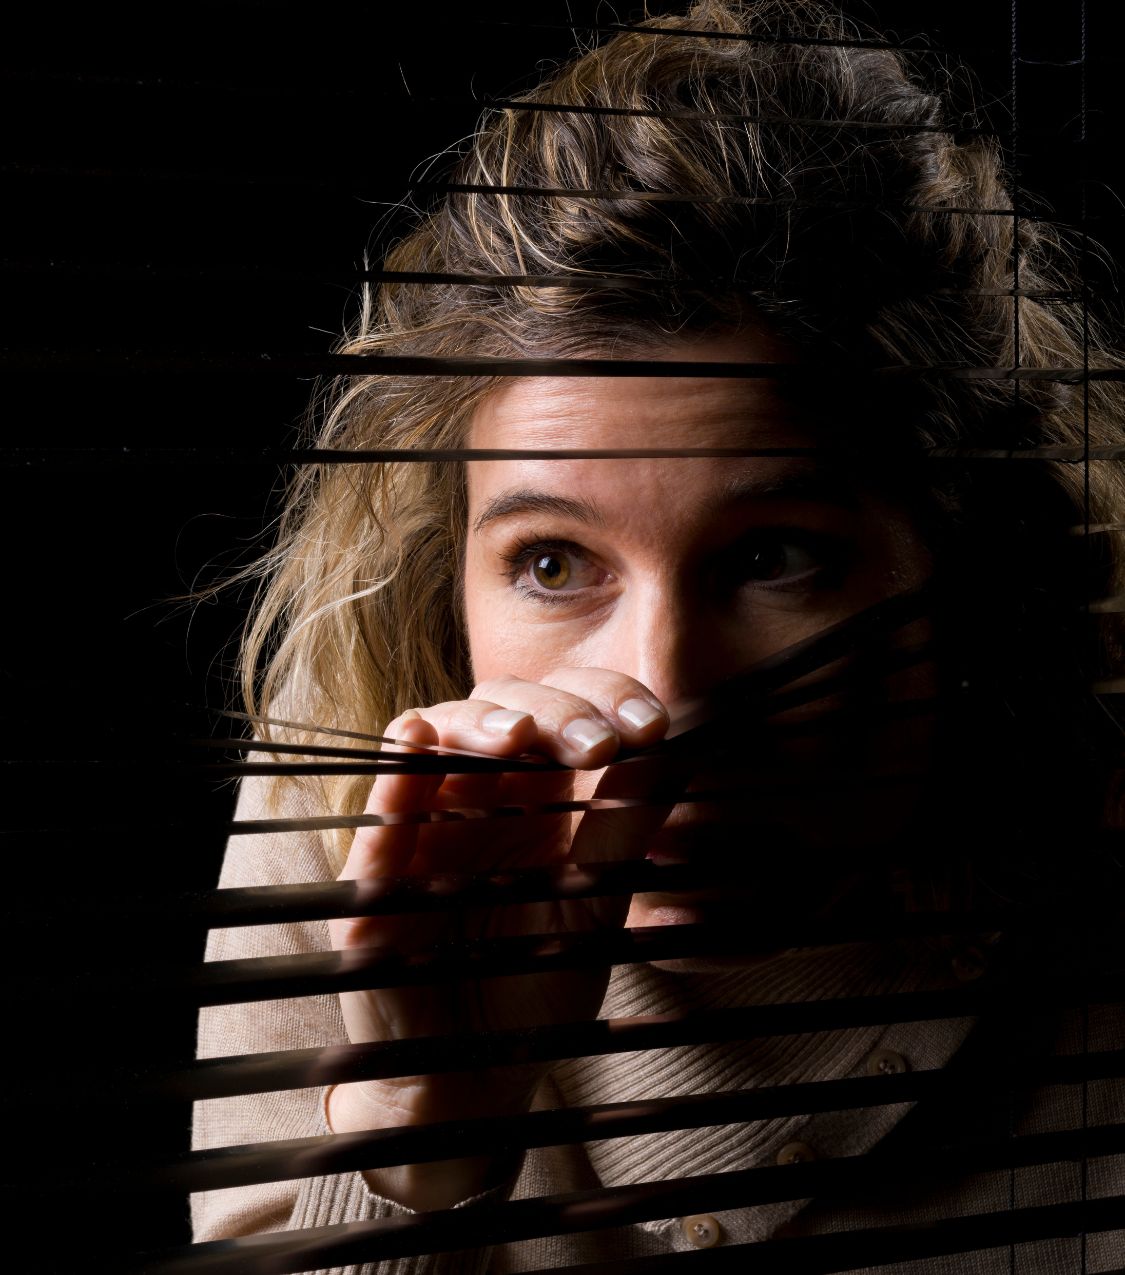 A woman peeking through blinds, representing the need for healing and transparency to reconcile after cheating. Contact Relationship Experts Online for marriage reconciliation guidance. Serving couples in North Carolina, the United States, Australia, Canada, and the United Kingdom.